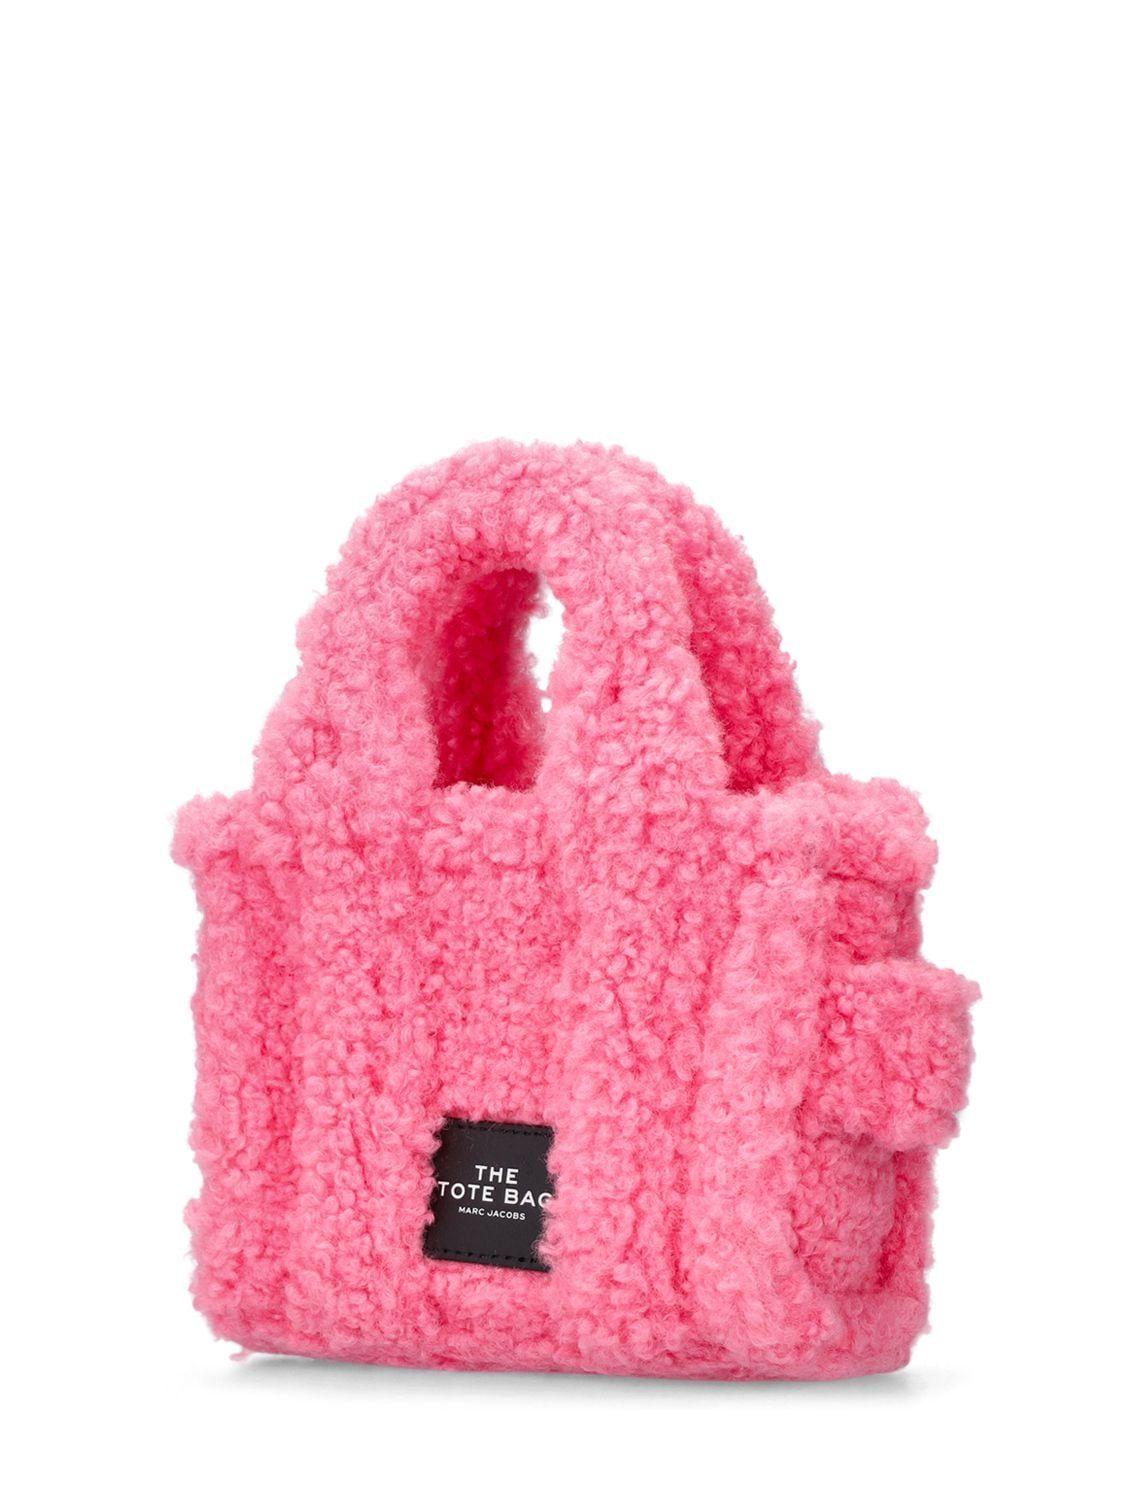 Marc Jacobs Micro Faux Teddy Tote Bag in Pink | Lyst